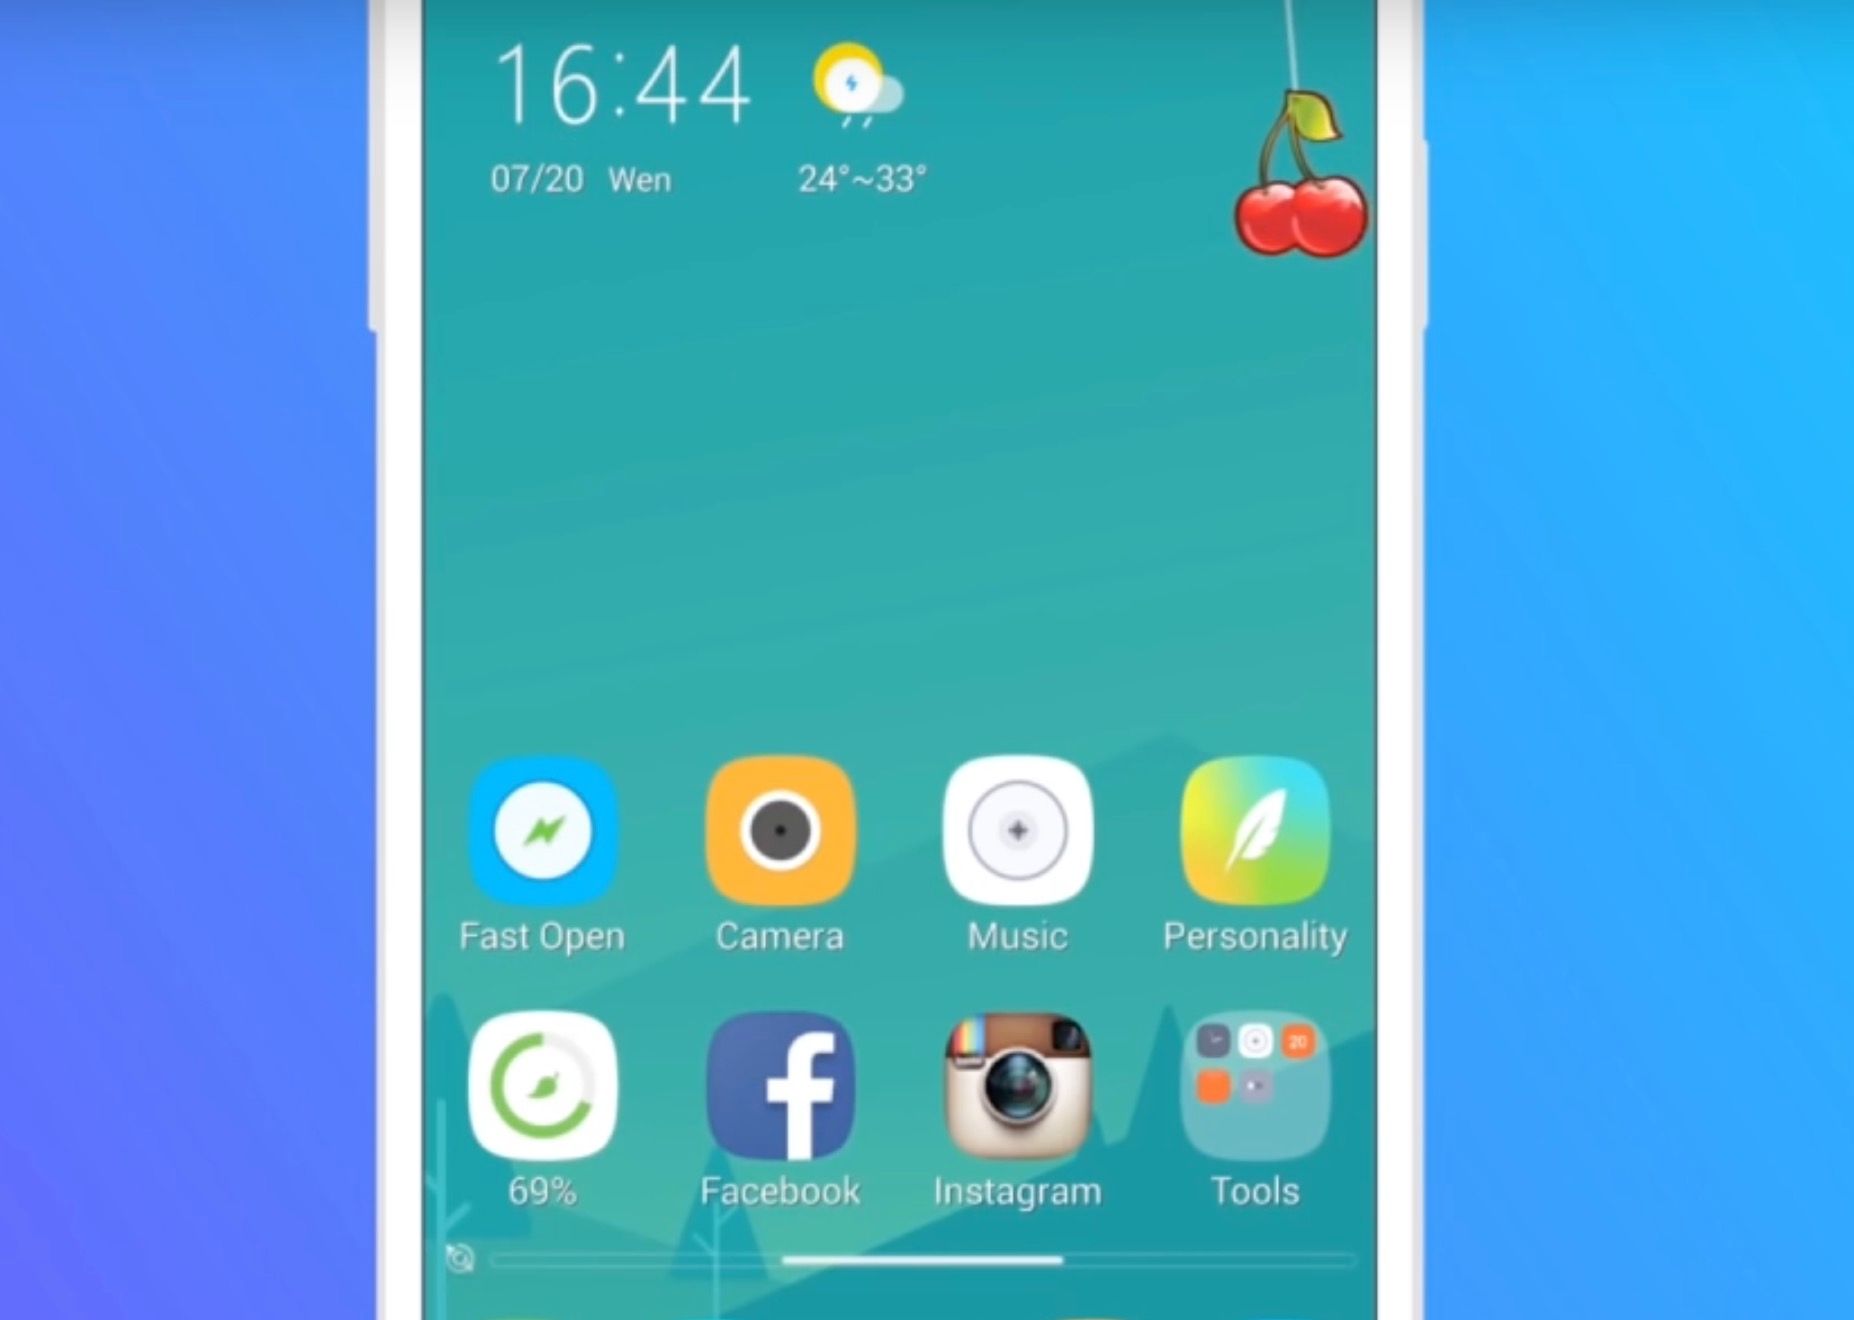 91 launcher pro a new way to spice up your android phone interface image 1